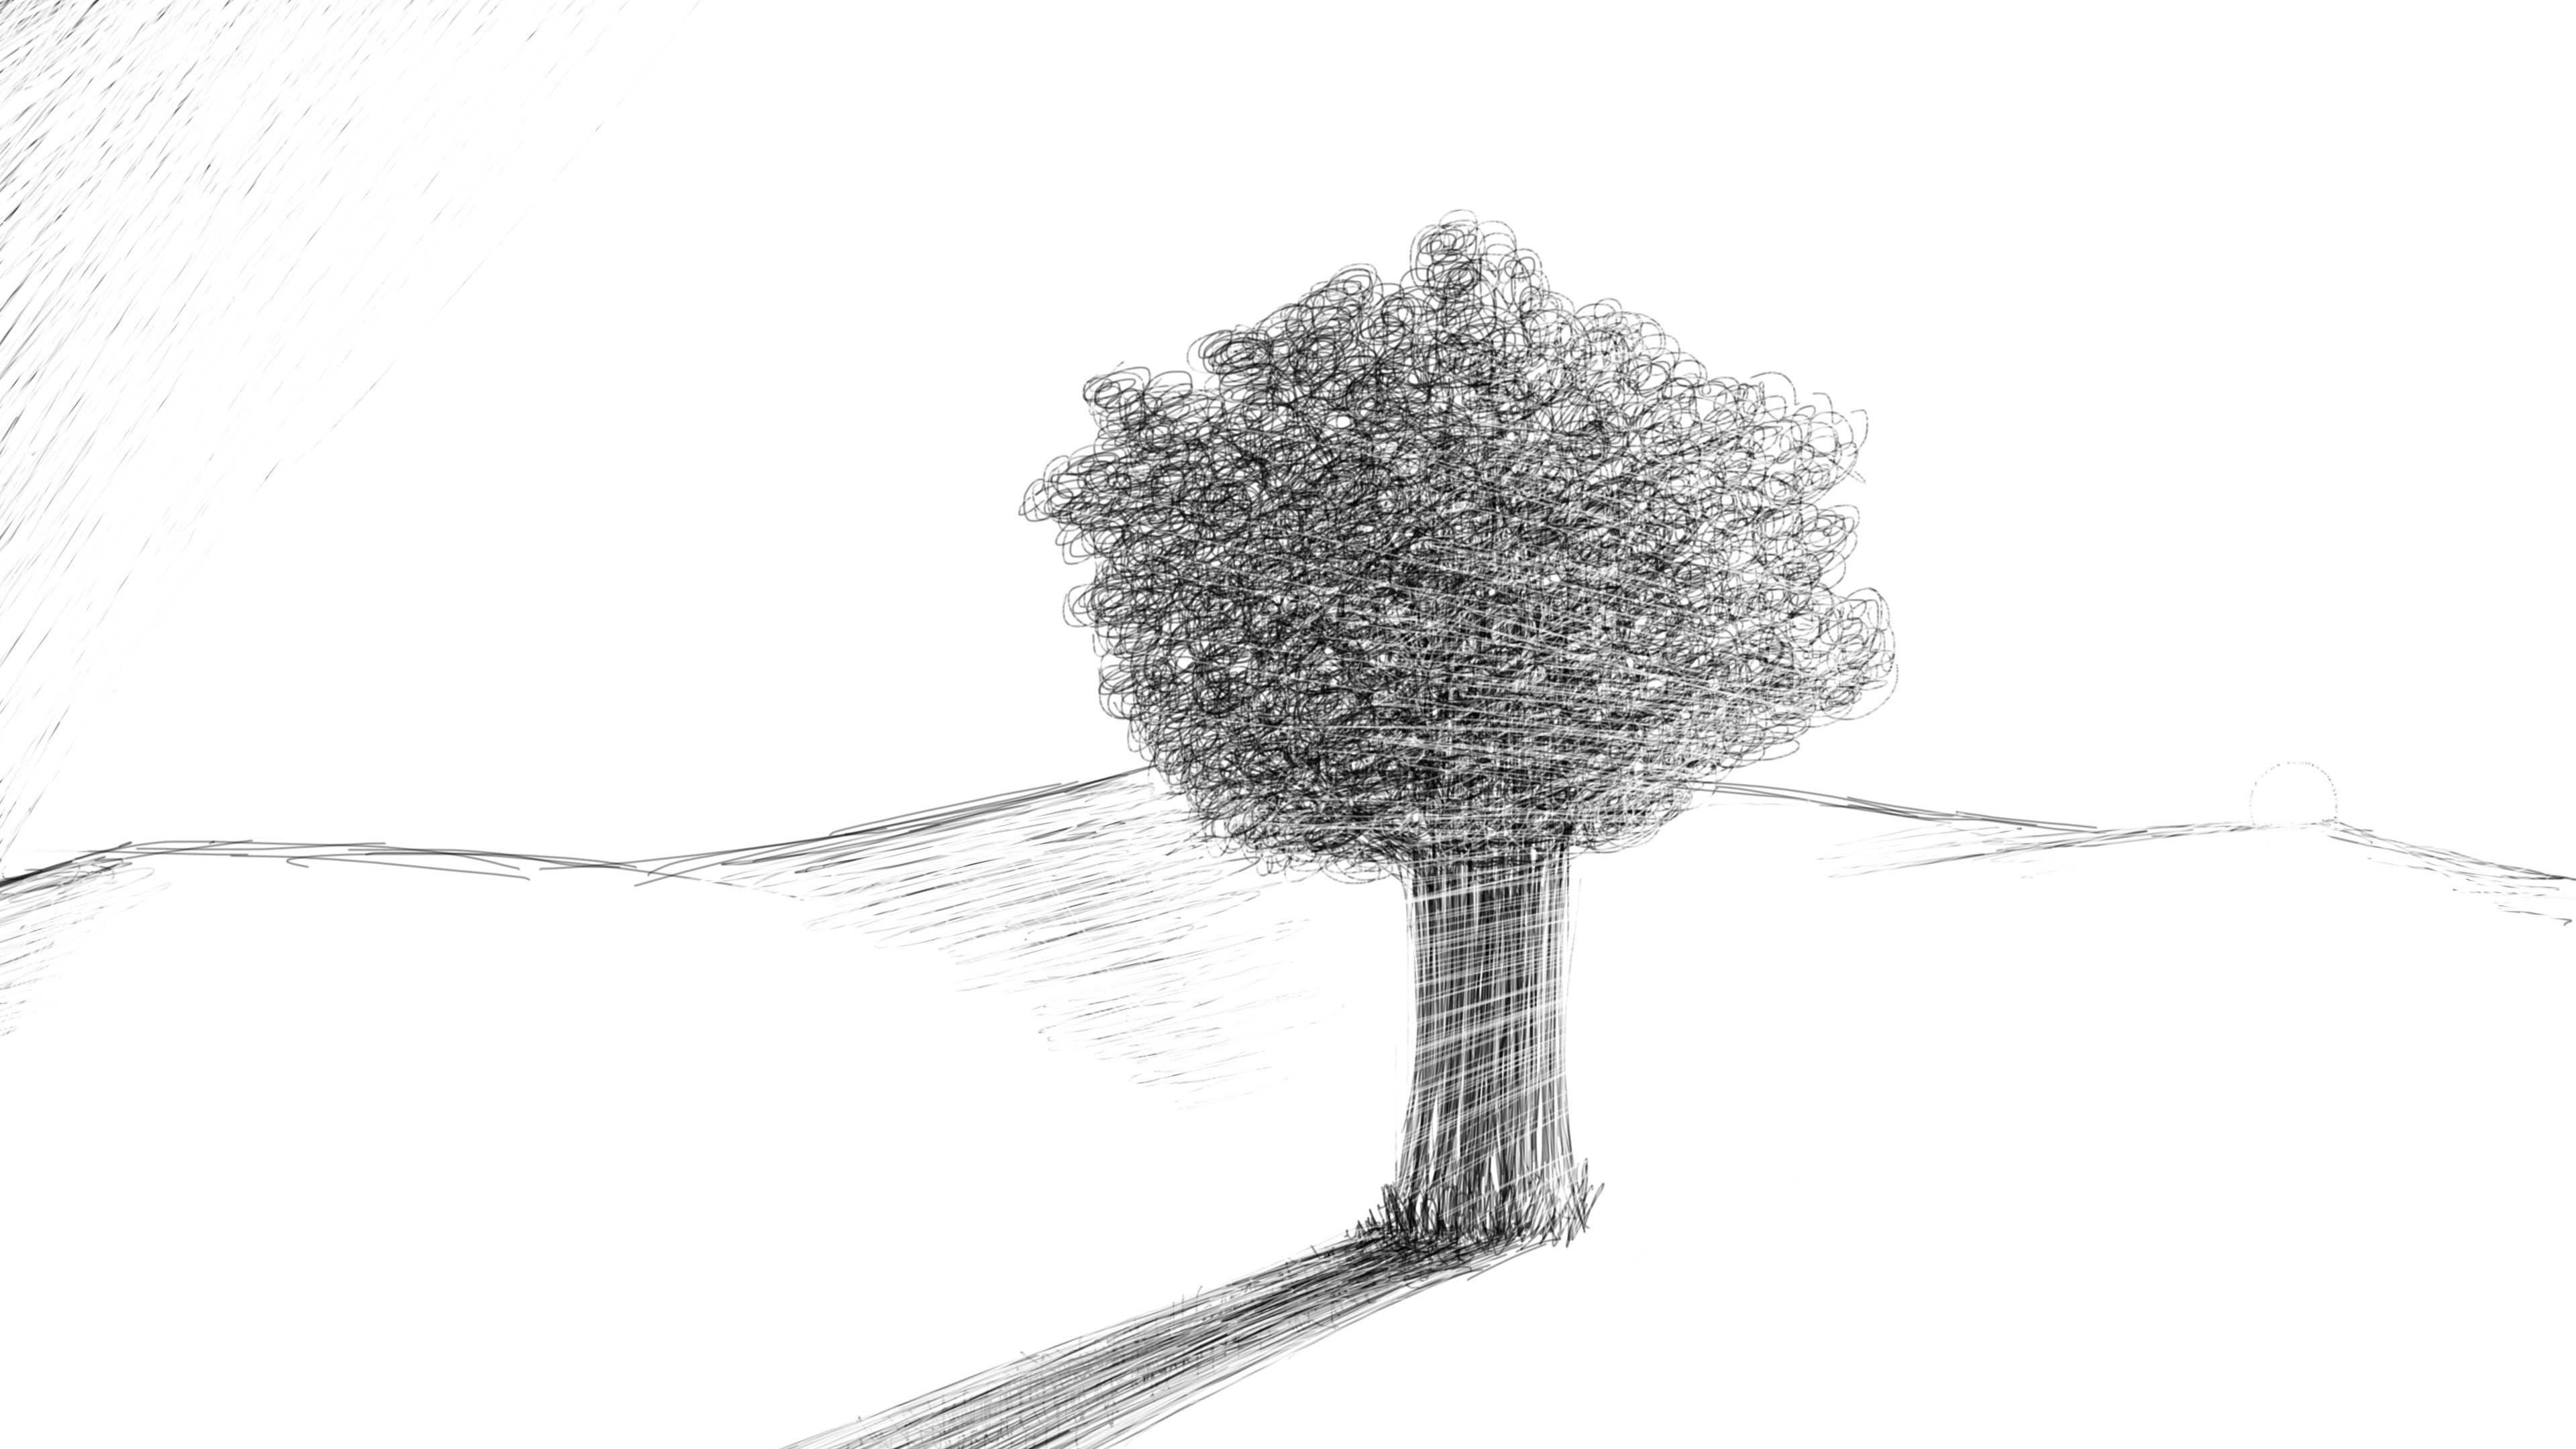 black tree against the light painting, trees, pencils, sketches, artwork